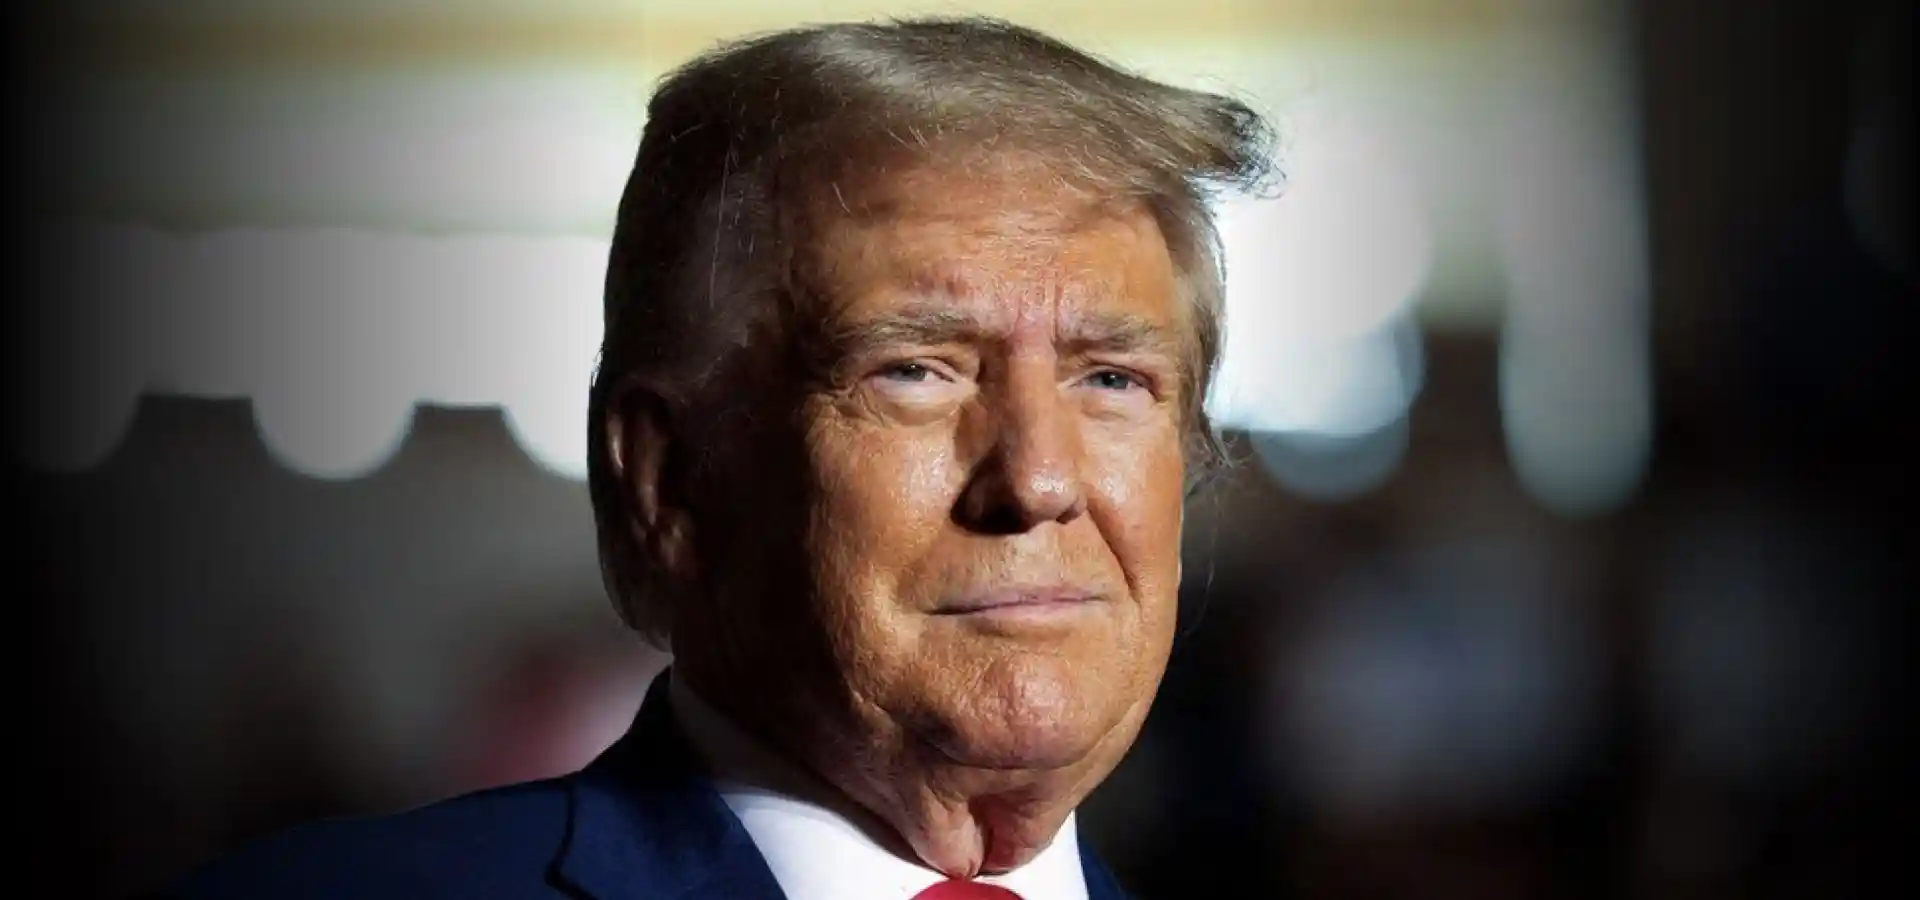 ‎Donald Trump Pleads Not Guilty in Plot to Overturn 2020 Election Result